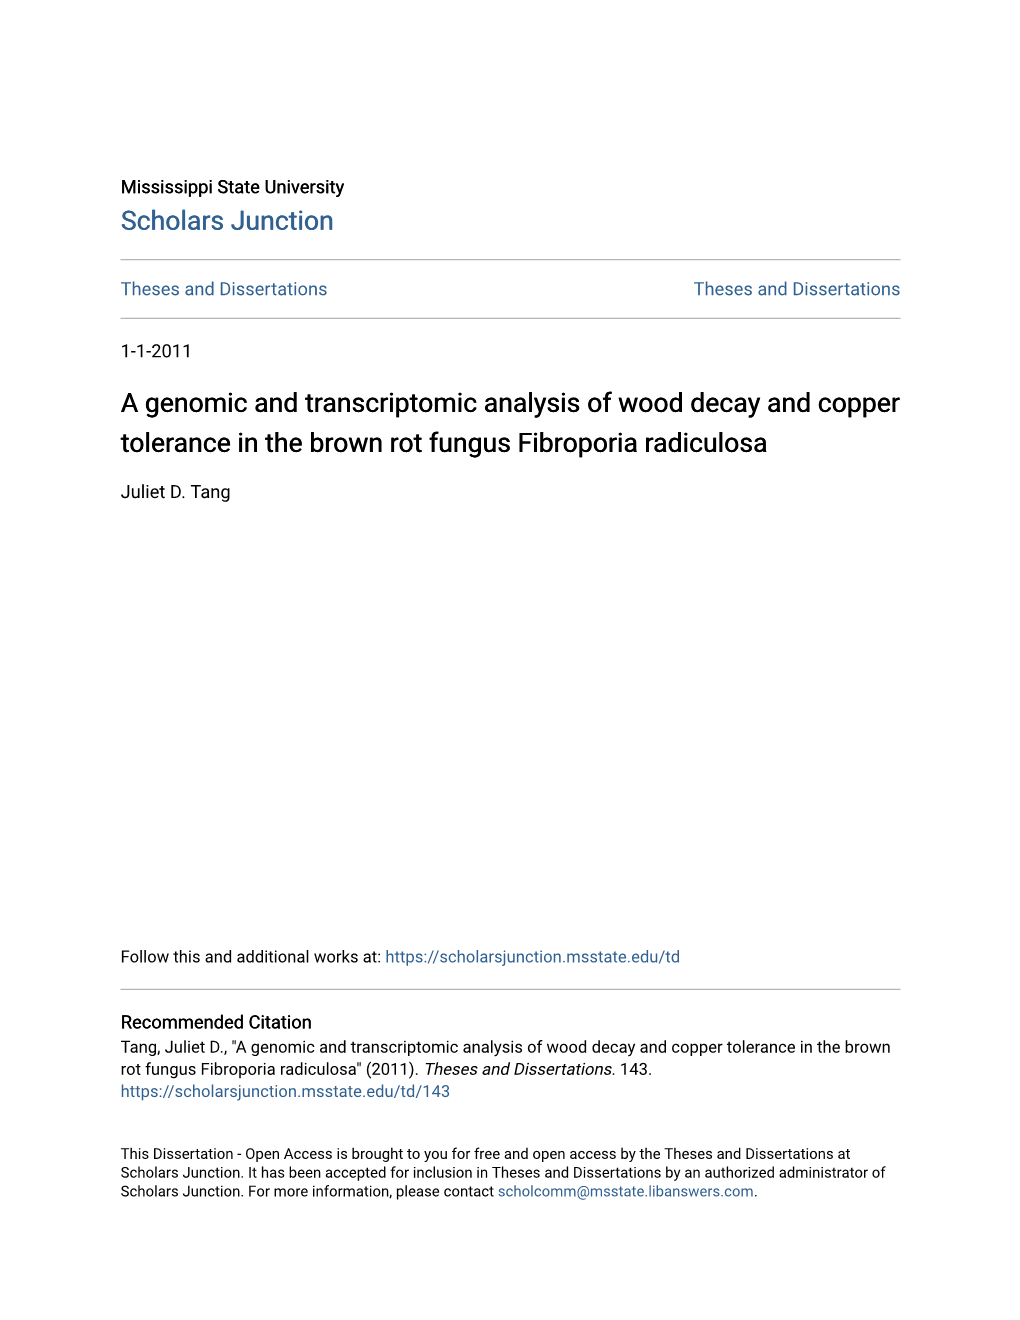 A Genomic and Transcriptomic Analysis of Wood Decay and Copper Tolerance in the Brown Rot Fungus Fibroporia Radiculosa